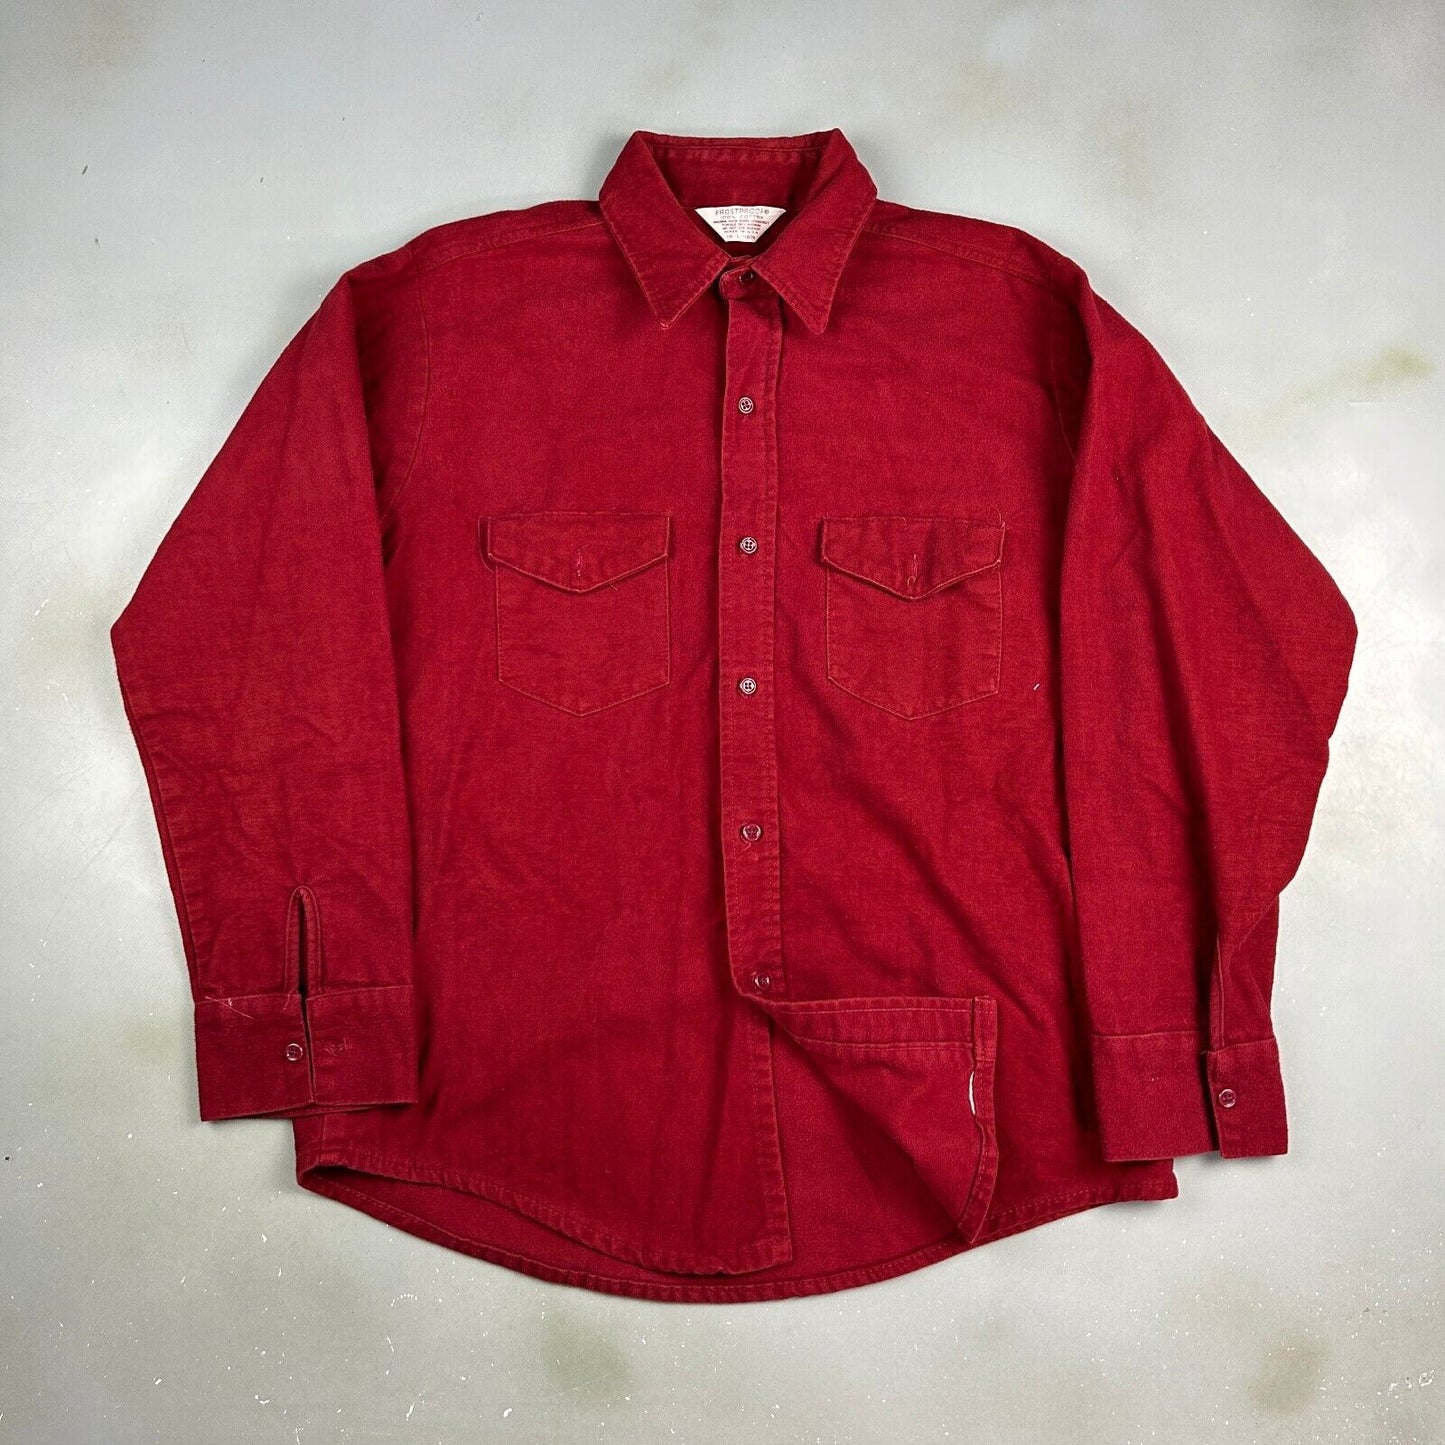 VINTAGE 90s Frostproof Red Chamois Cloth Button Up Shirt sz Large Adult